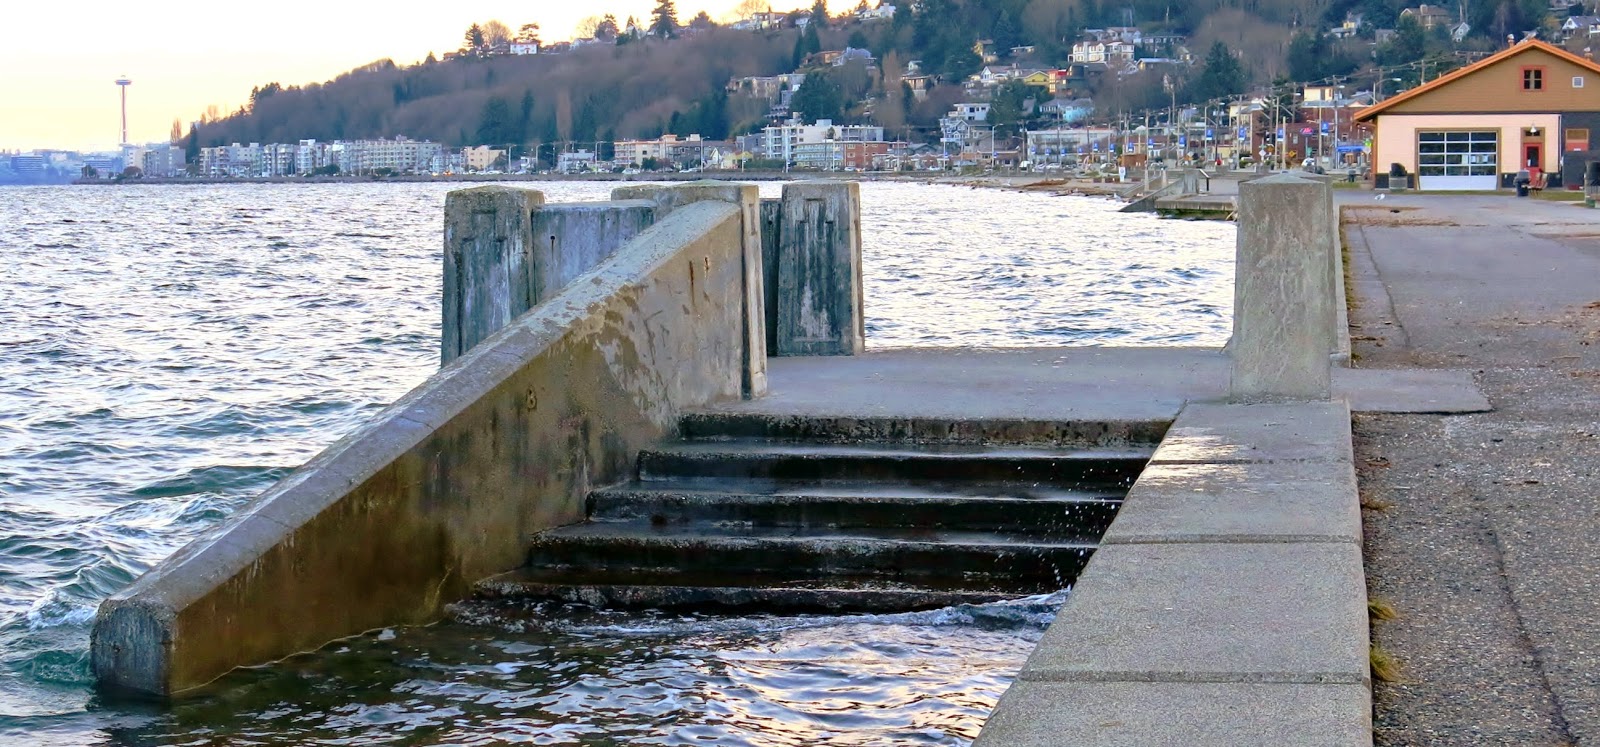 Water coming up high on cement steps at Alki Beach with waterfront buildings and Spaceneedle showing in the background.